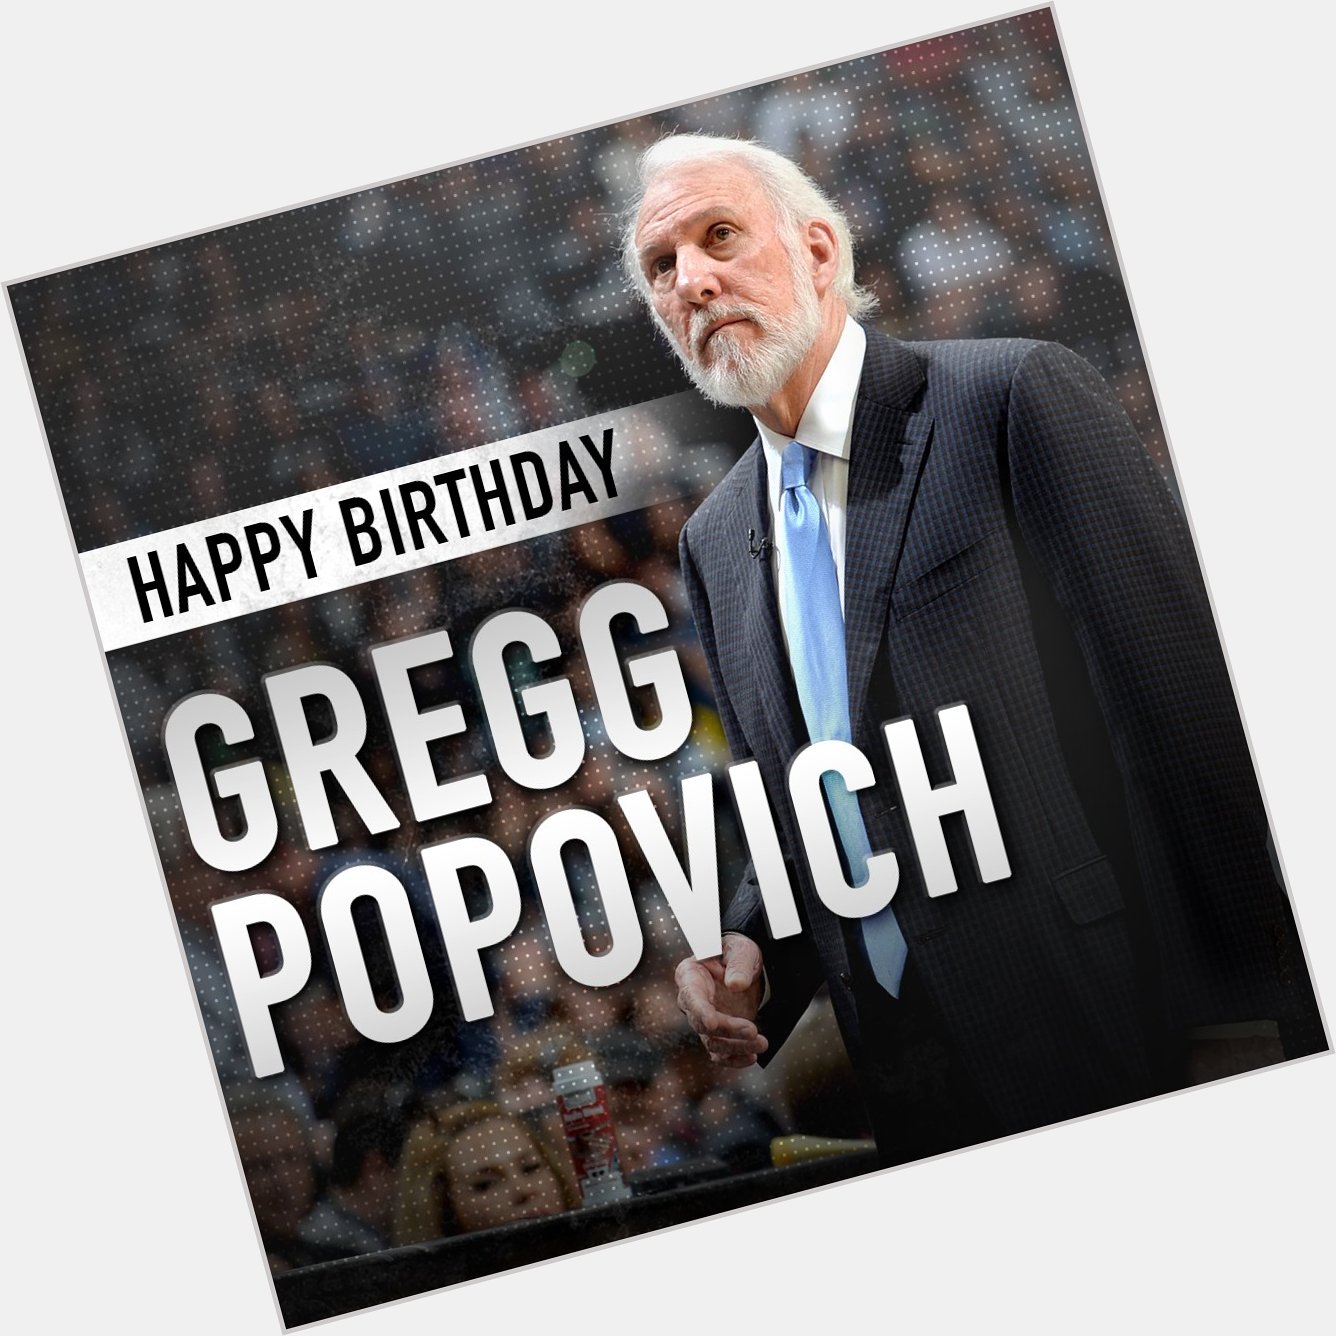 NBA: NBA_Coaches: We would like to wish spurs Head Coach Gregg Popovich a very Happy Birthday! 